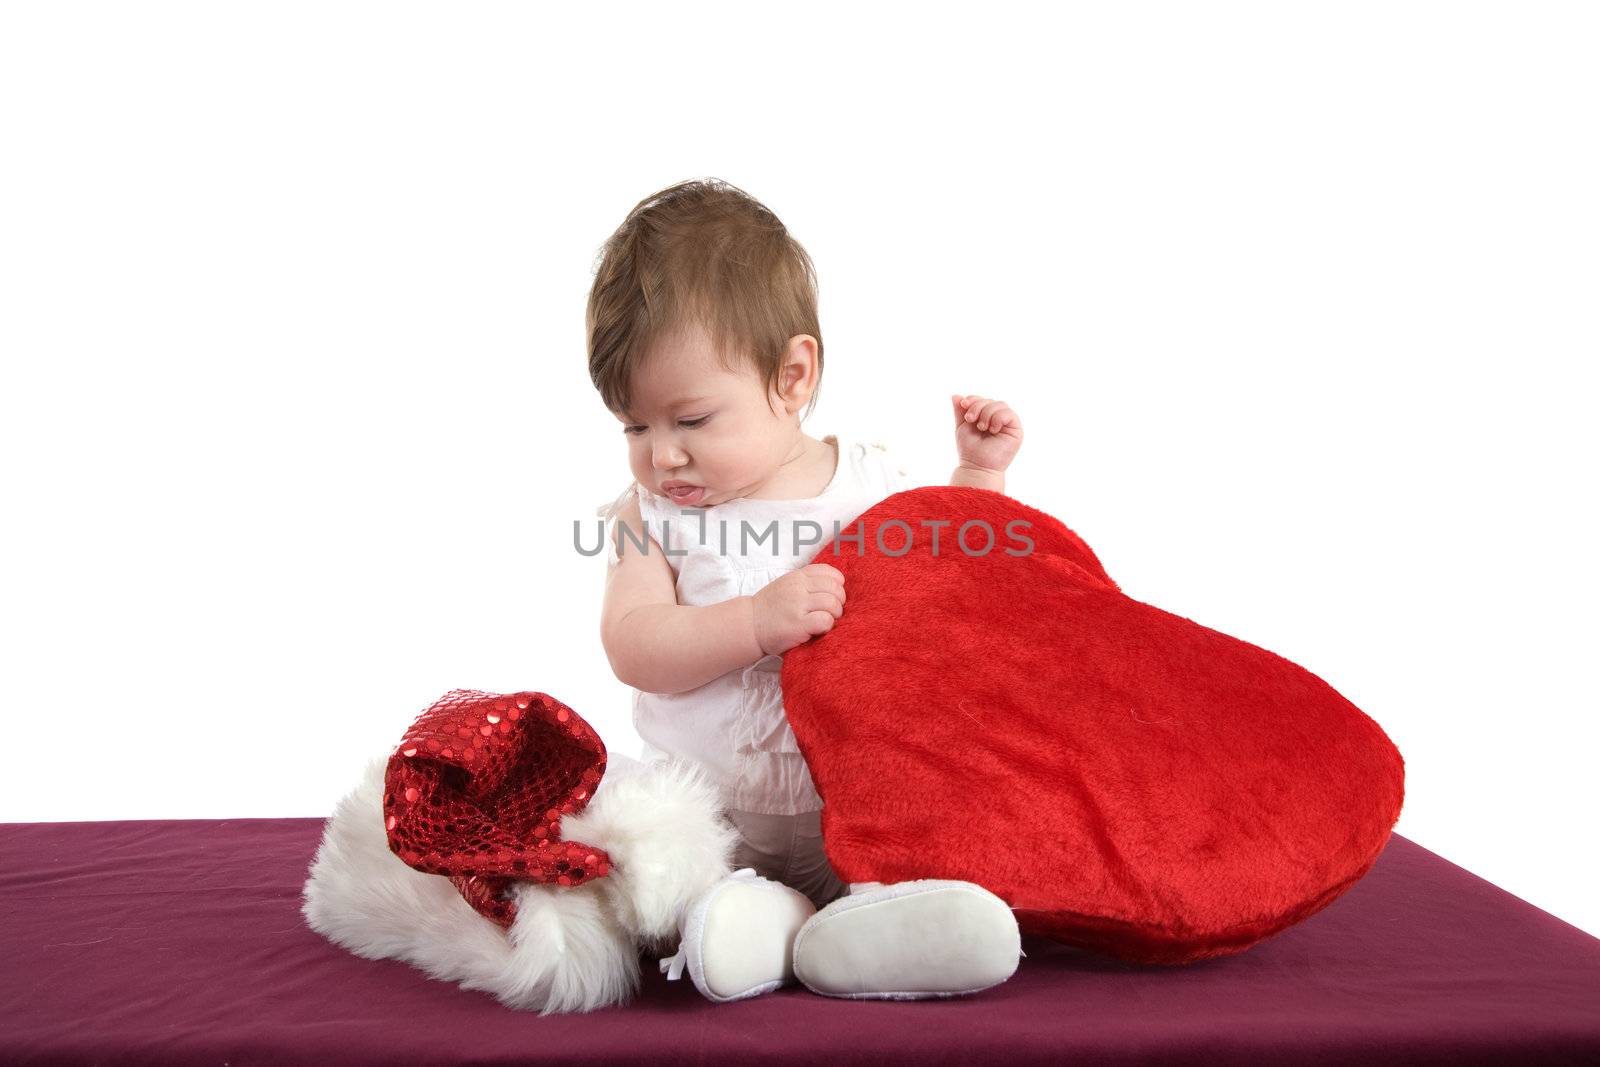 Cute little baby girl looking a bit surprised at the santa hat next to her